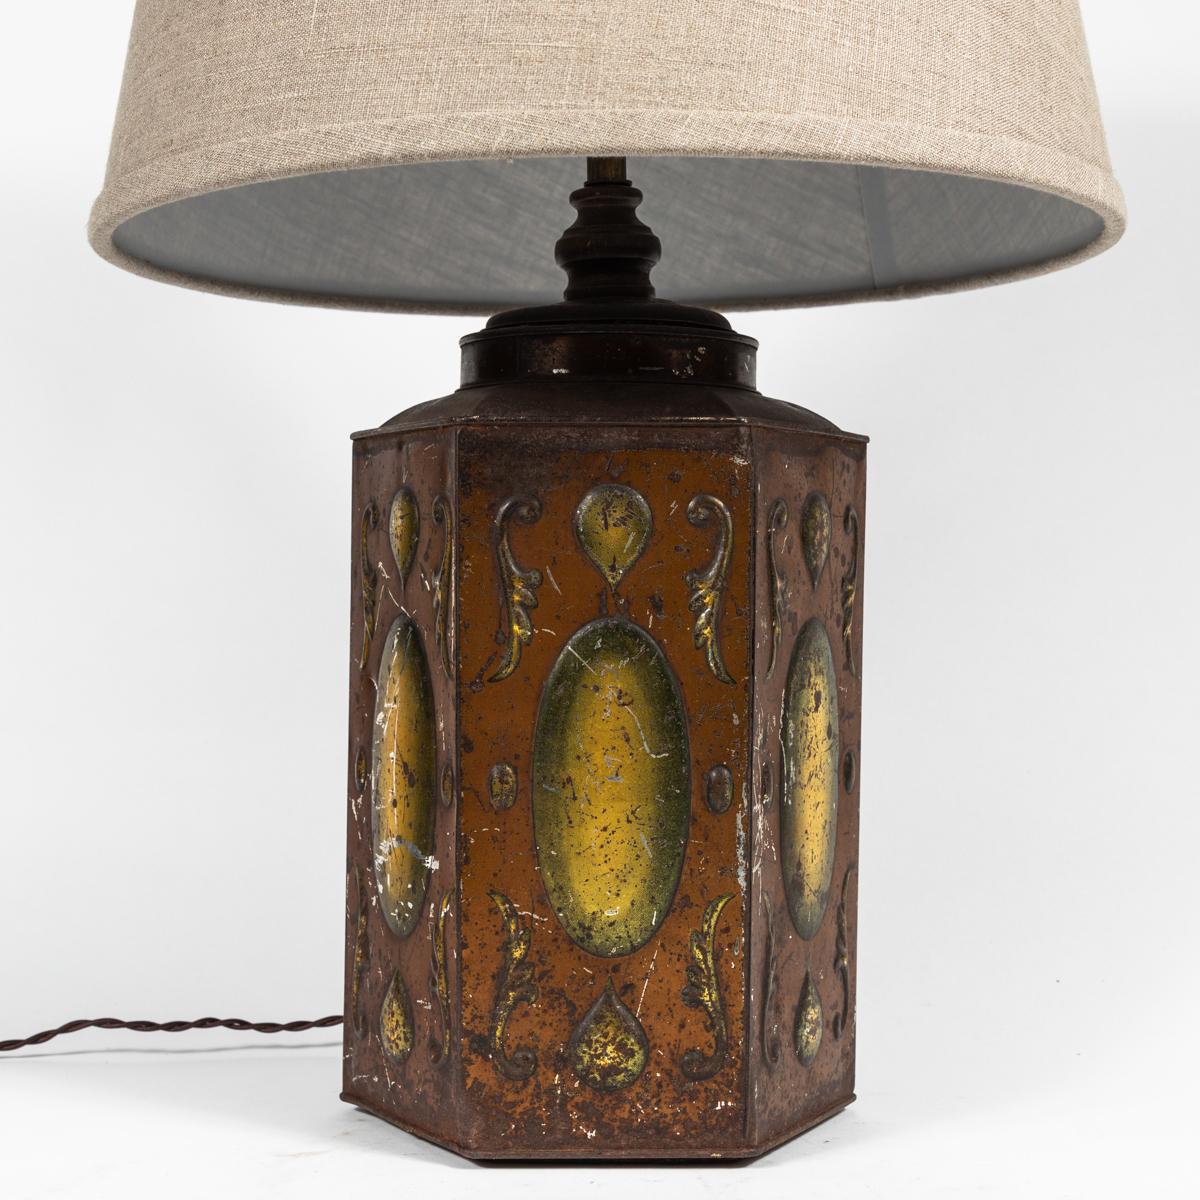 Late 19th-century English tole table lamp with deep rust and yellow hand-painted accenting and custom flax-toned linen shade. The hexagonal base features an oblong disc on each of its panels, surrounded by a few small architectural flourishes. The